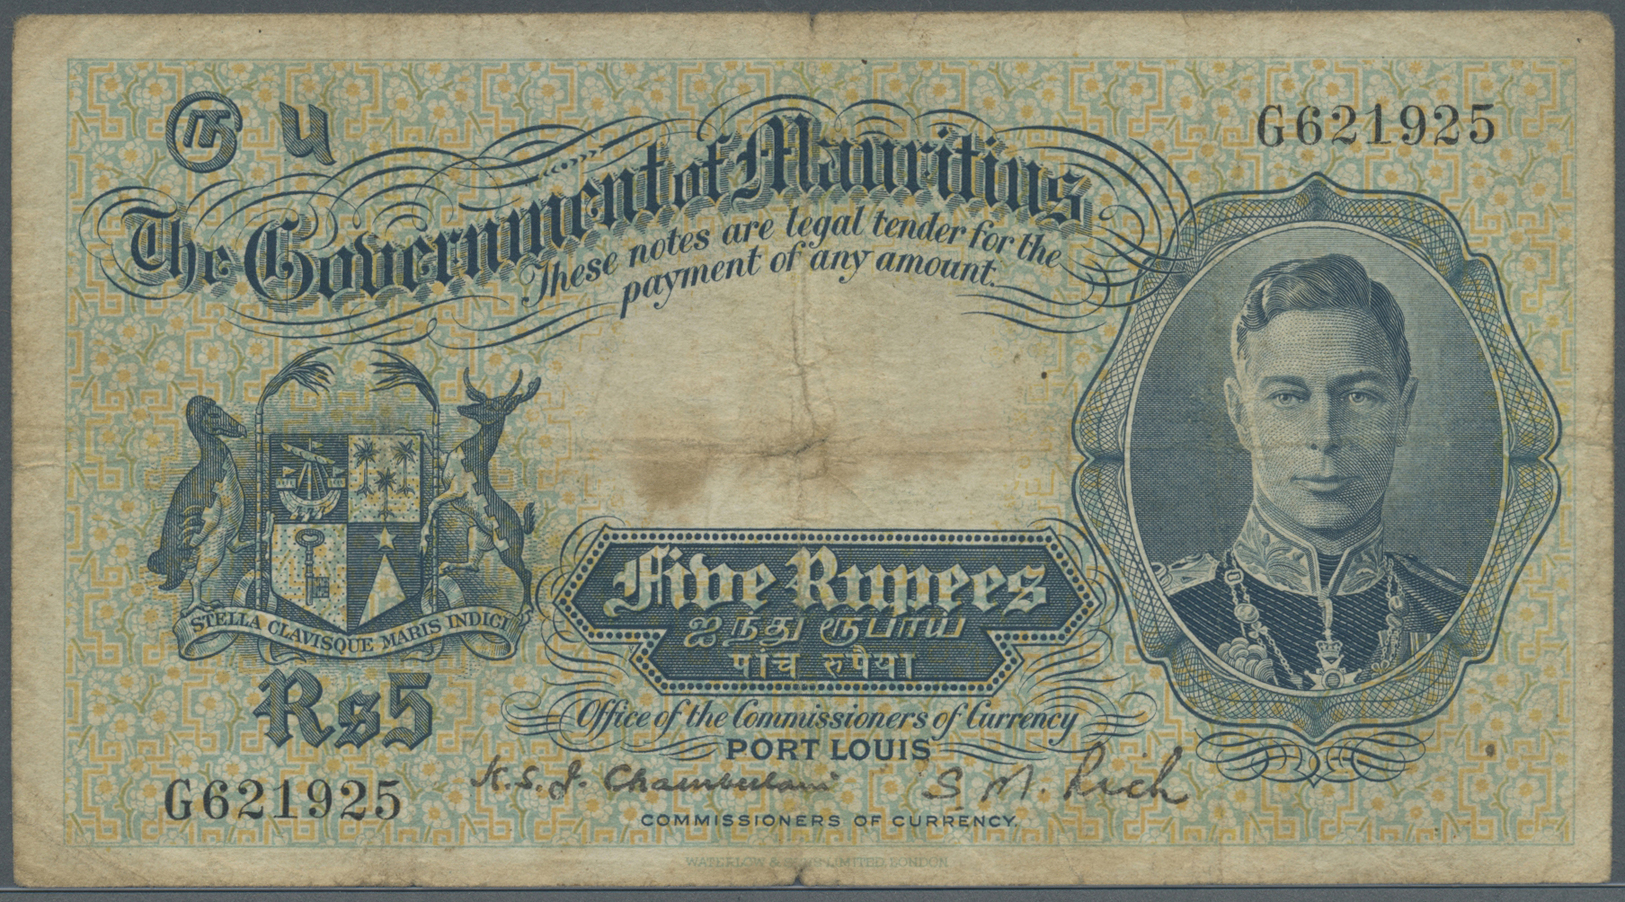 01692 Mauritius: 5 Rupees 1937 P. 22, Portrait KG VI, Used With Stronger Center And Horizontal Fold, Creases And Stain I - Mauritius